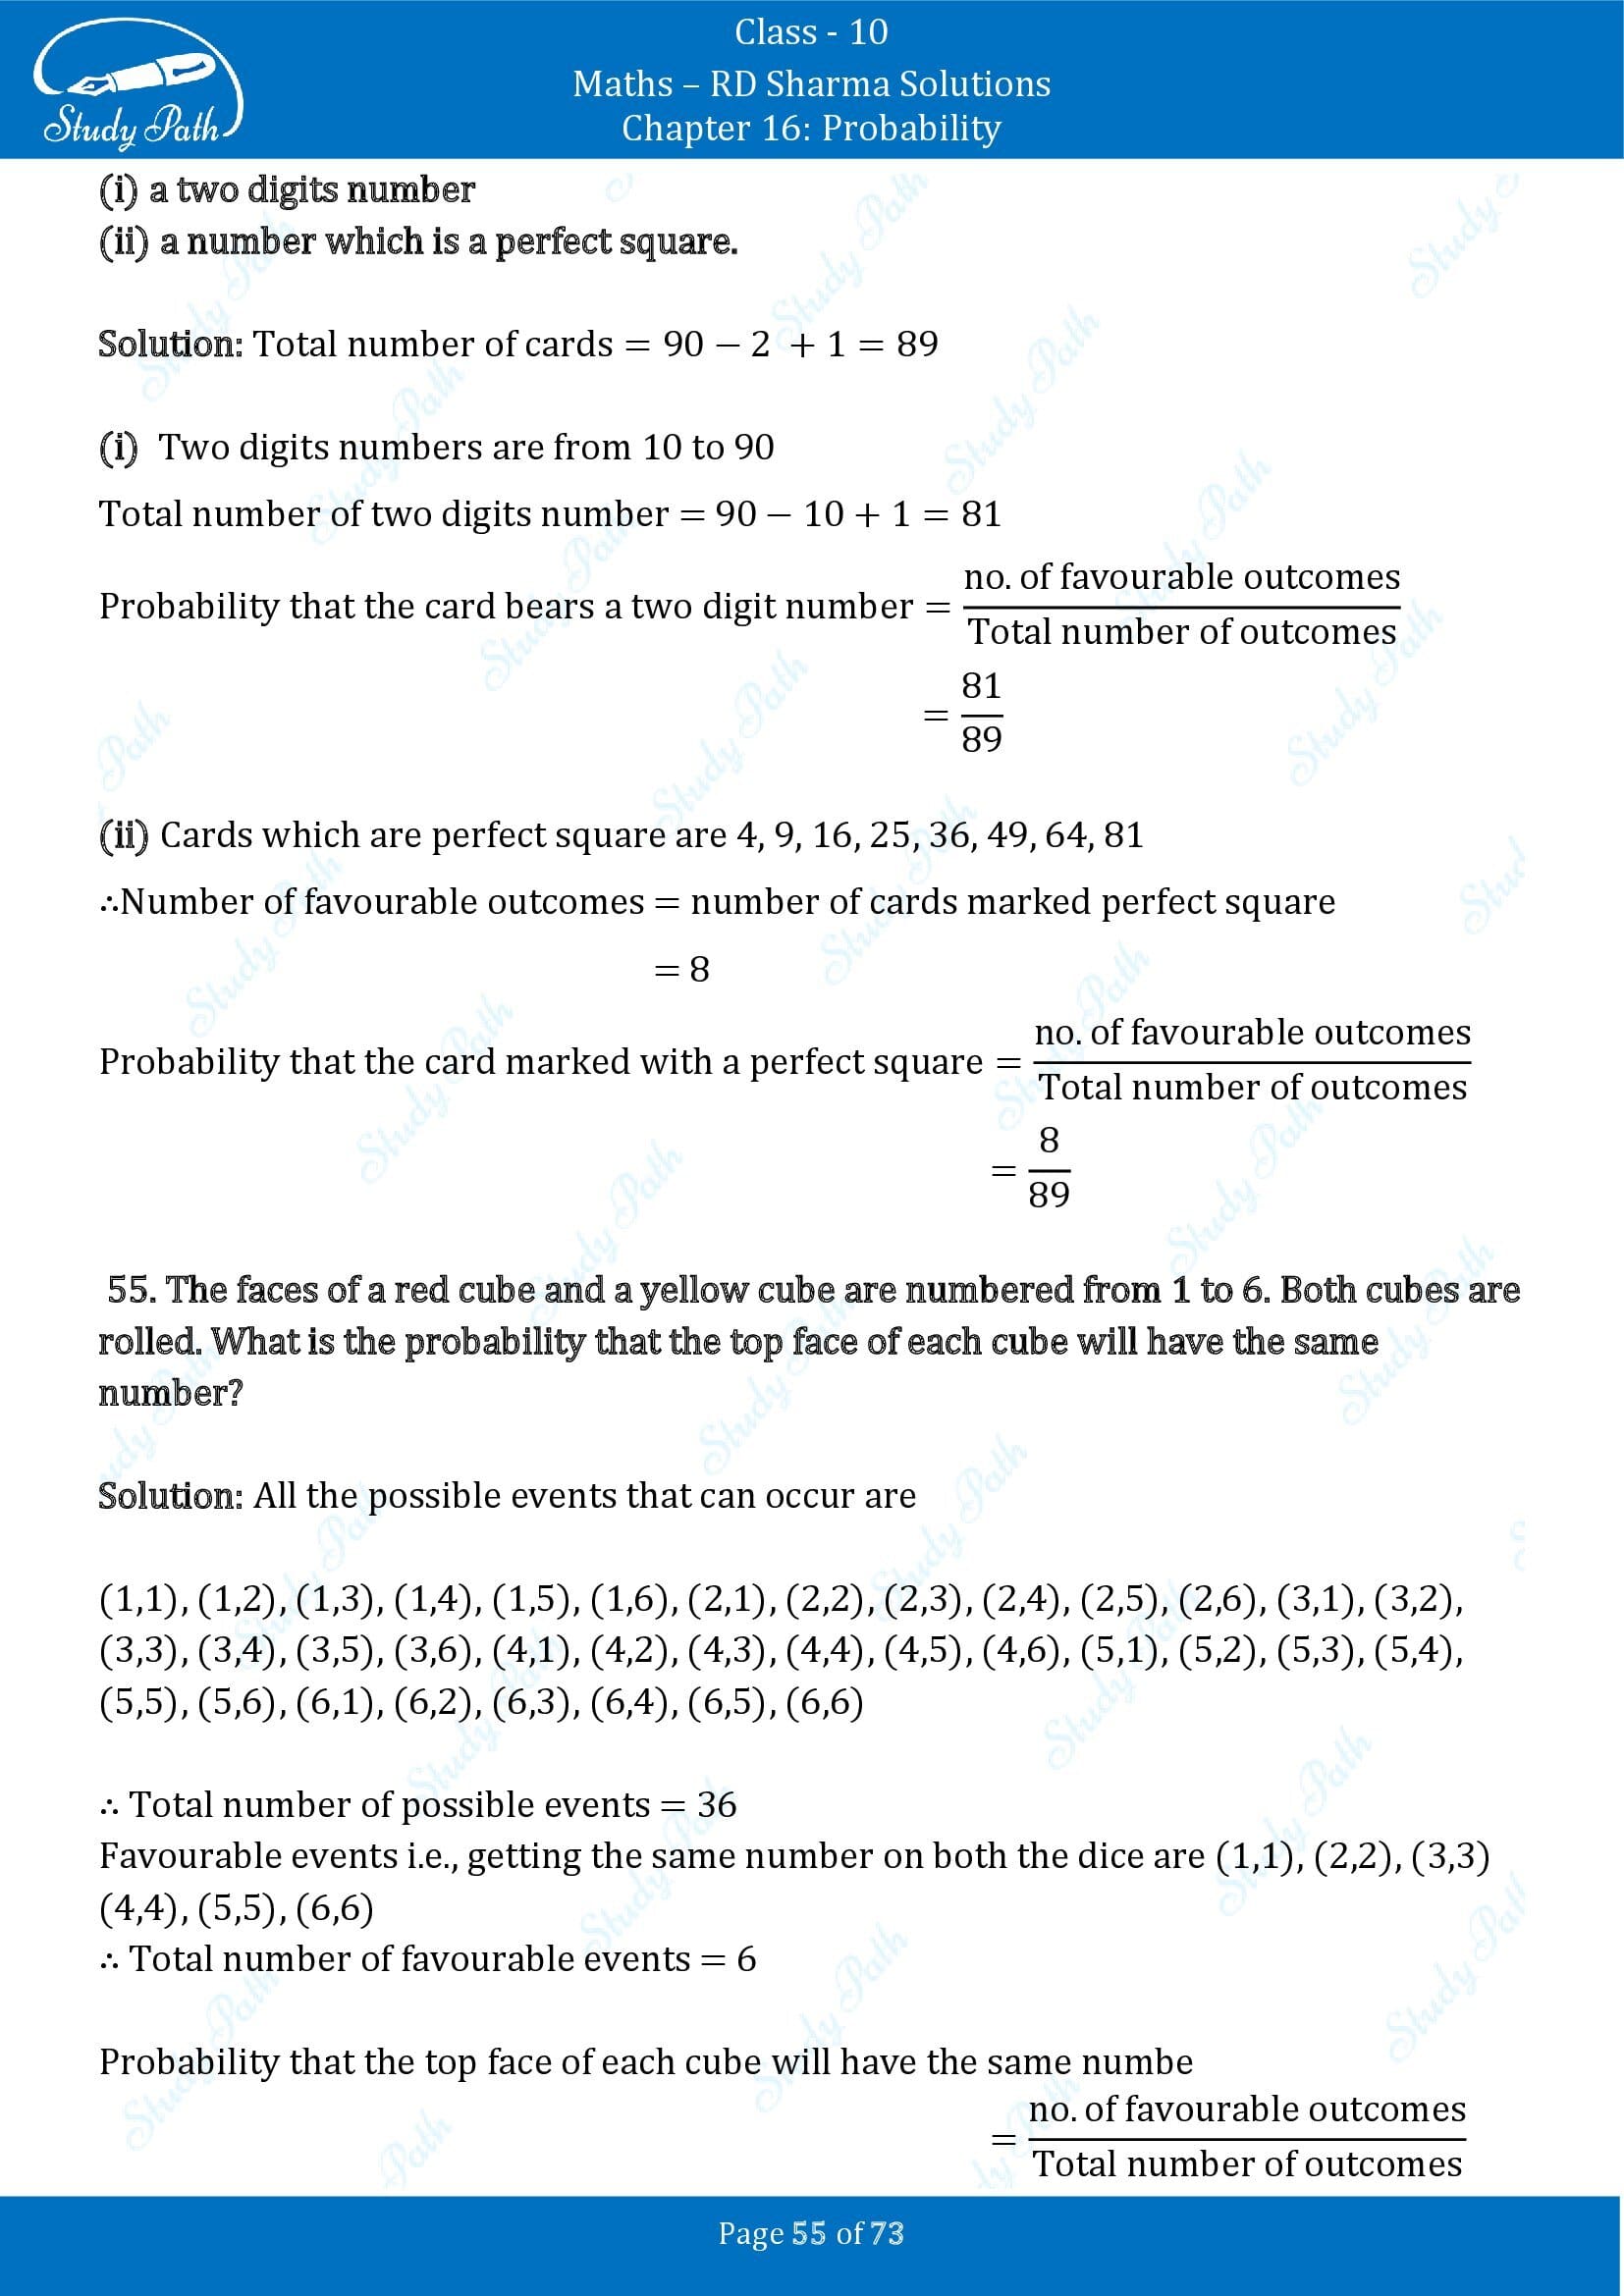 RD Sharma Solutions Class 10 Chapter 16 Probability Exercise 16.1 00055